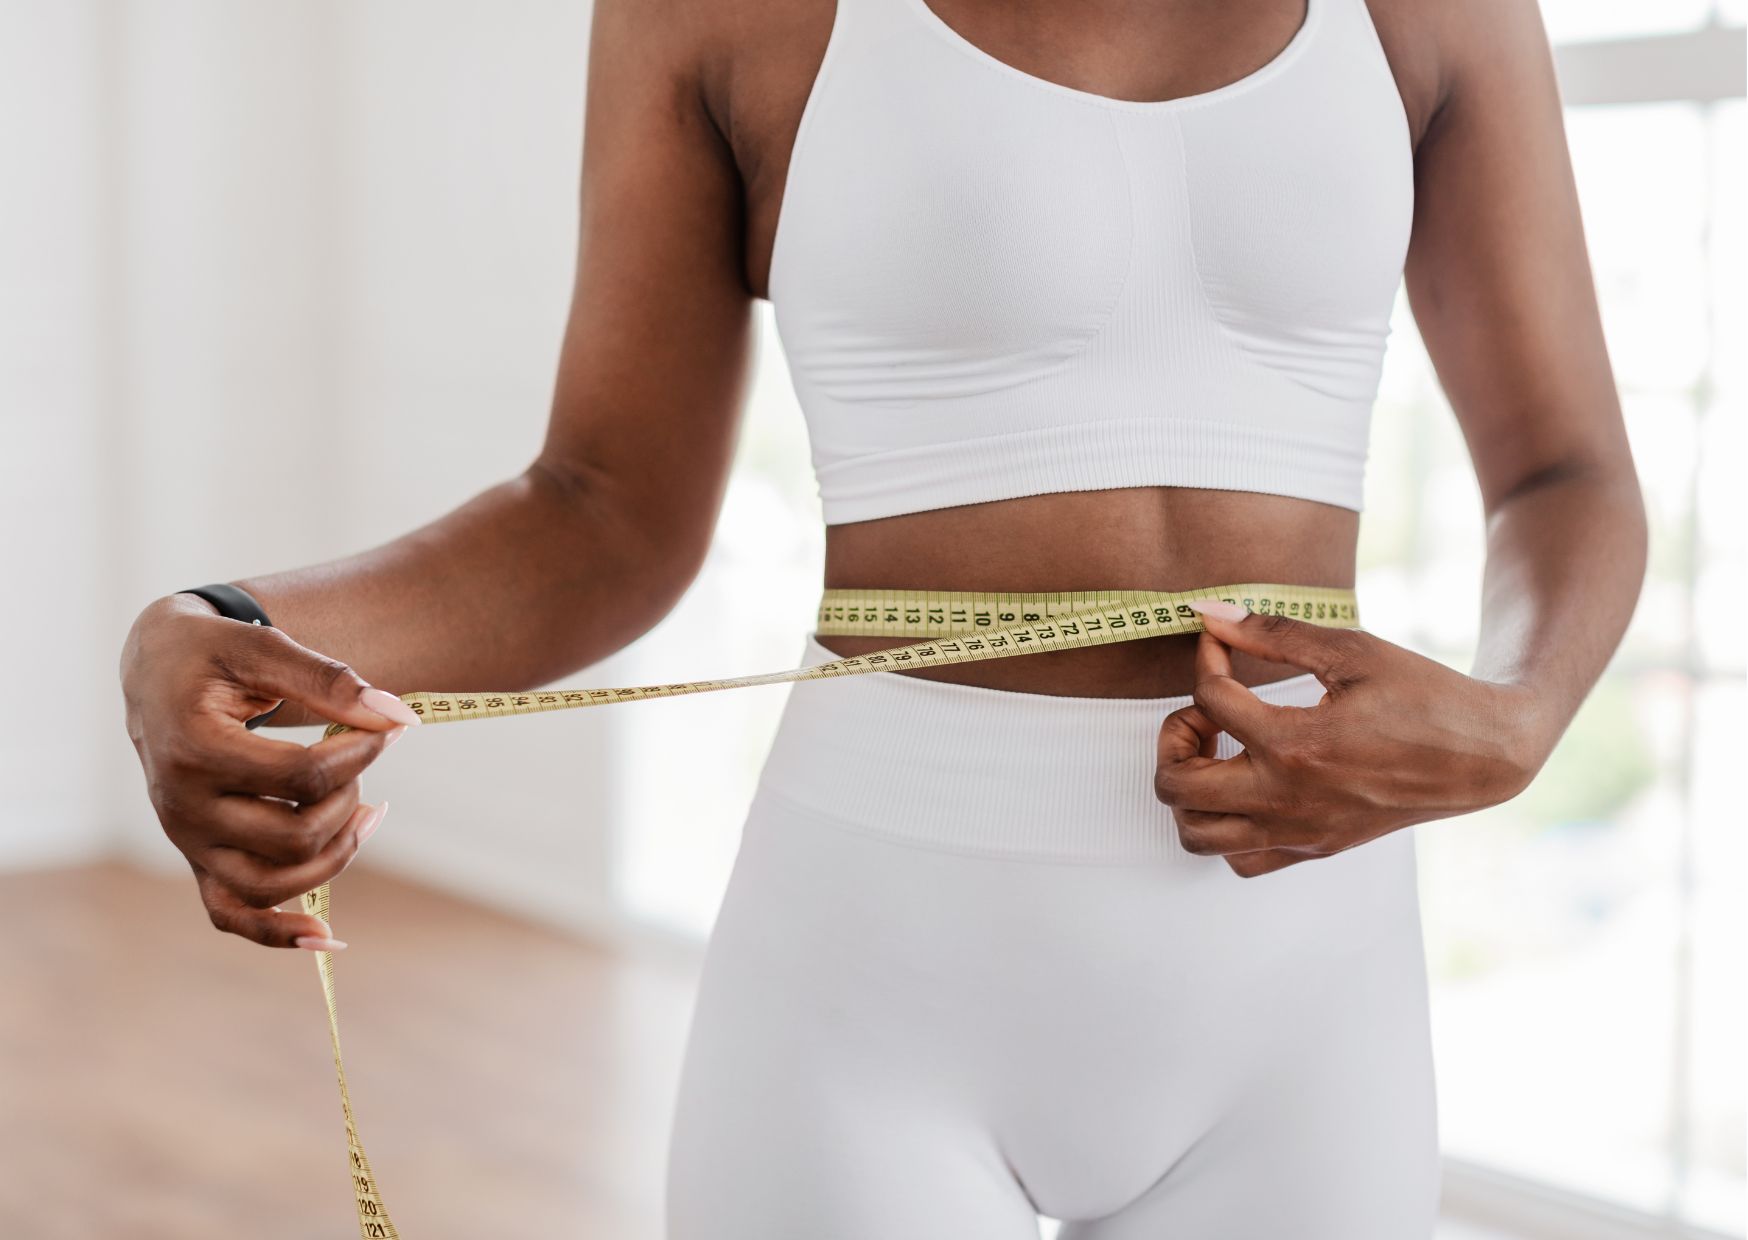 How to Take Body Measurements for Weight Loss - Working Against Gravity